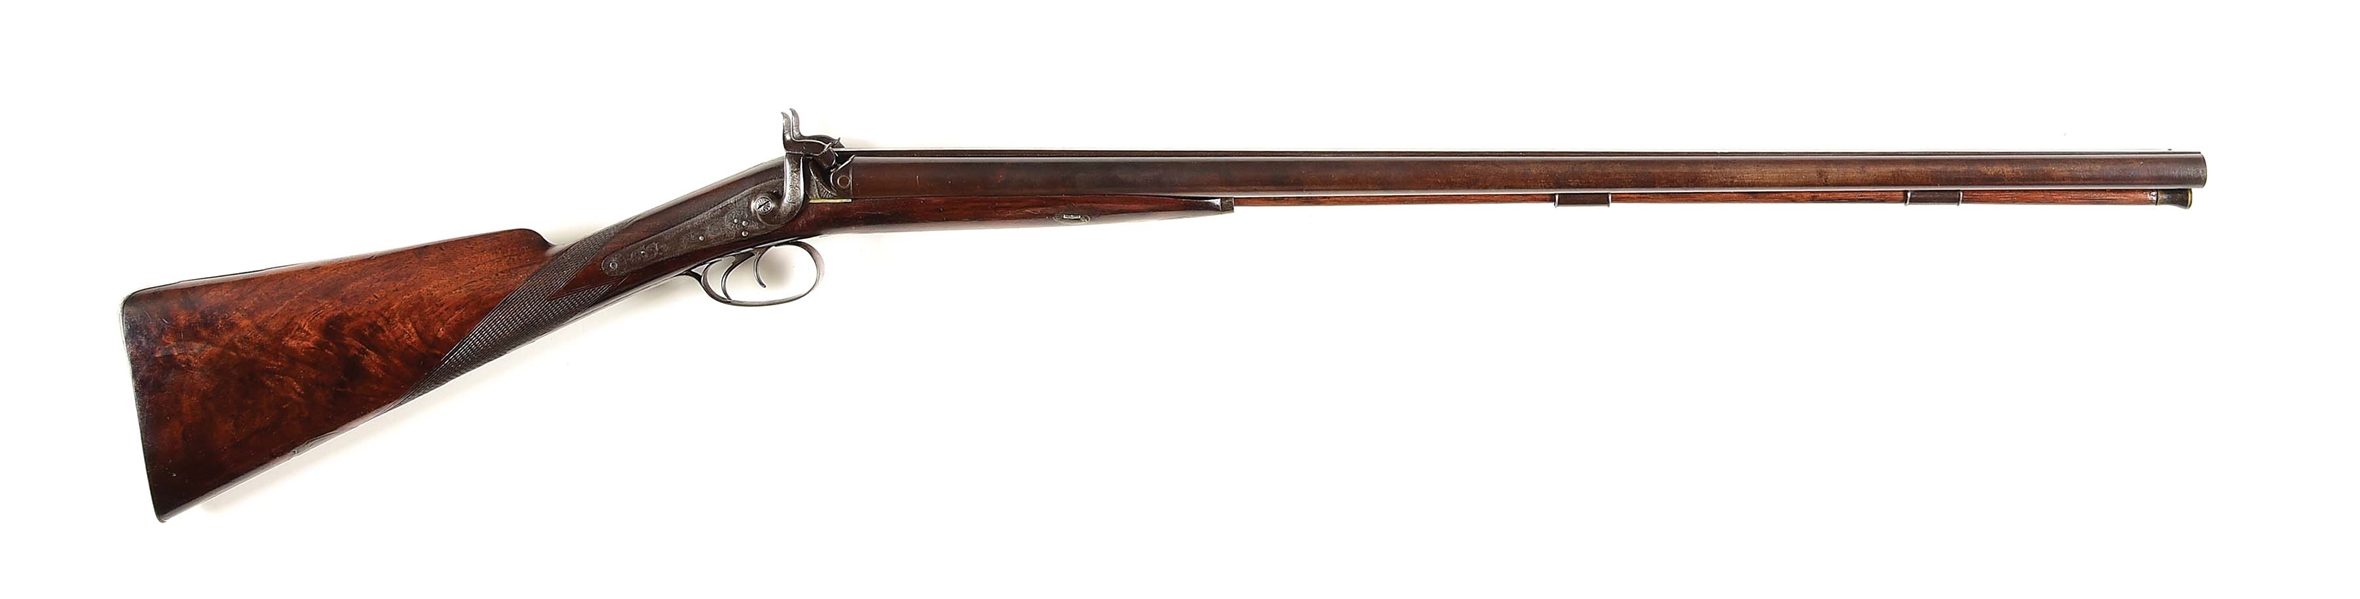 (A) SPANG & WALLACE SIDE BY SIDE 10 BORE PERCUSSION SHOTGUN.